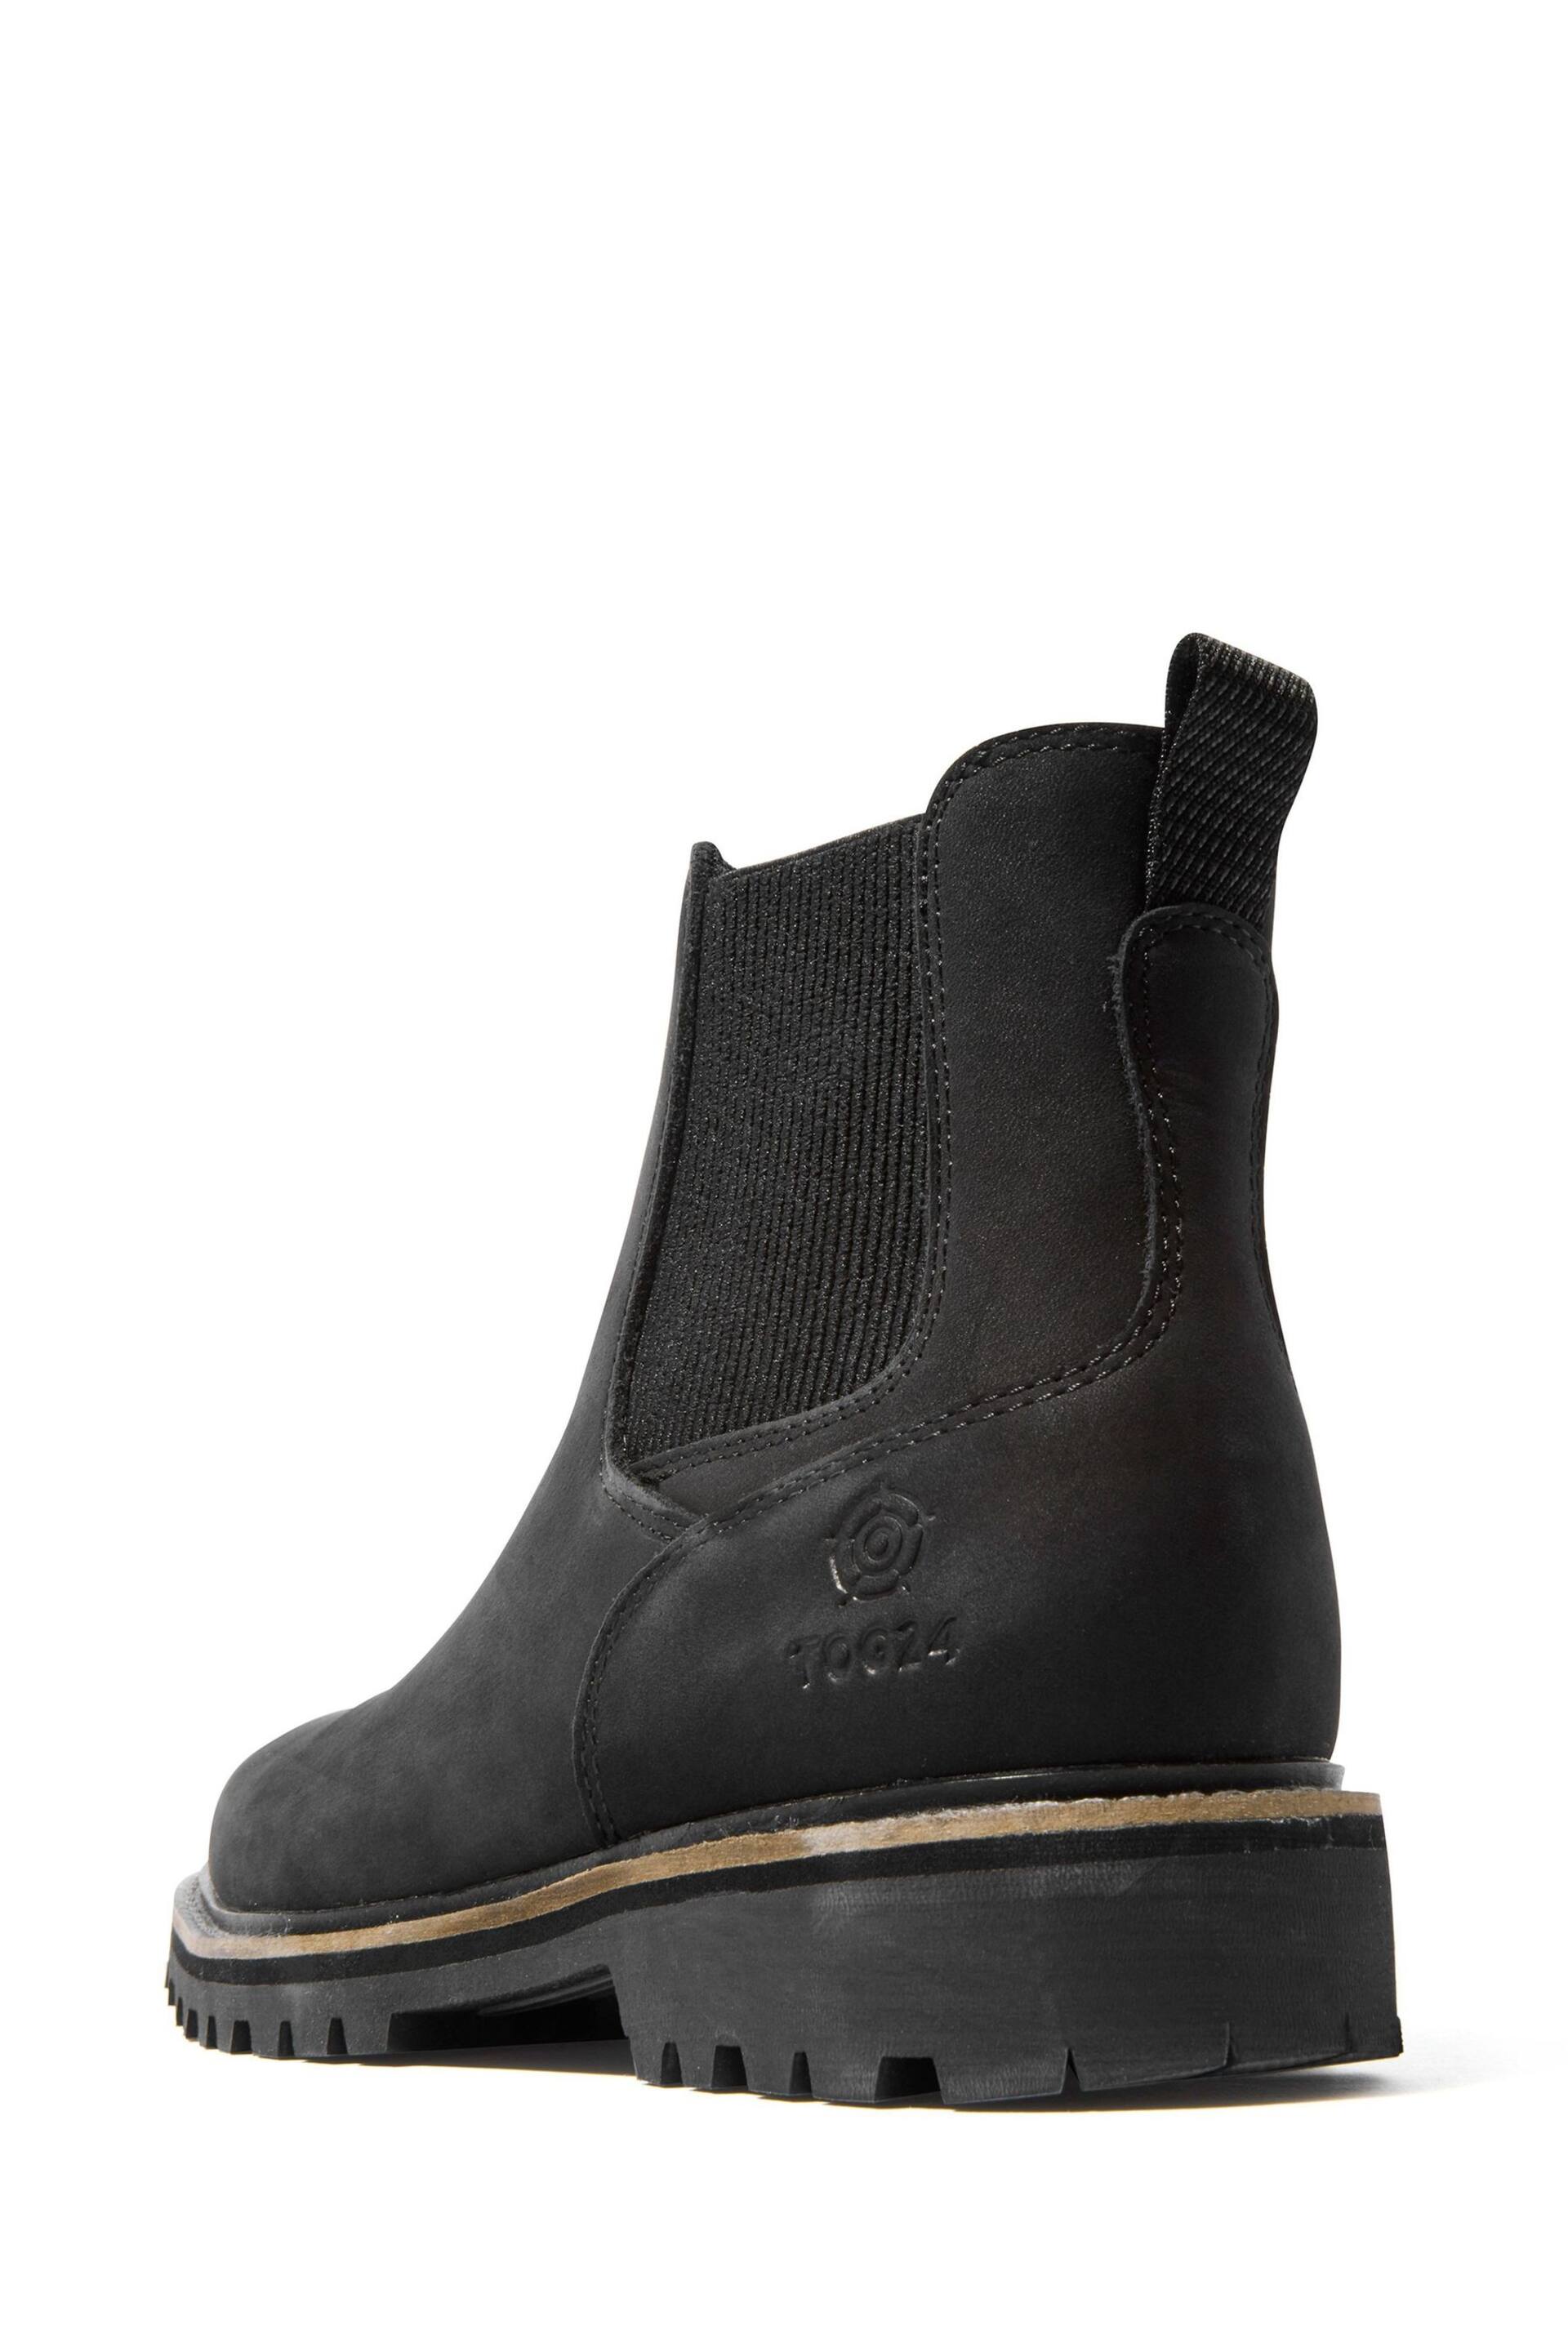 Tog 24 Black Canyon Chelsea Boots - Image 4 of 7